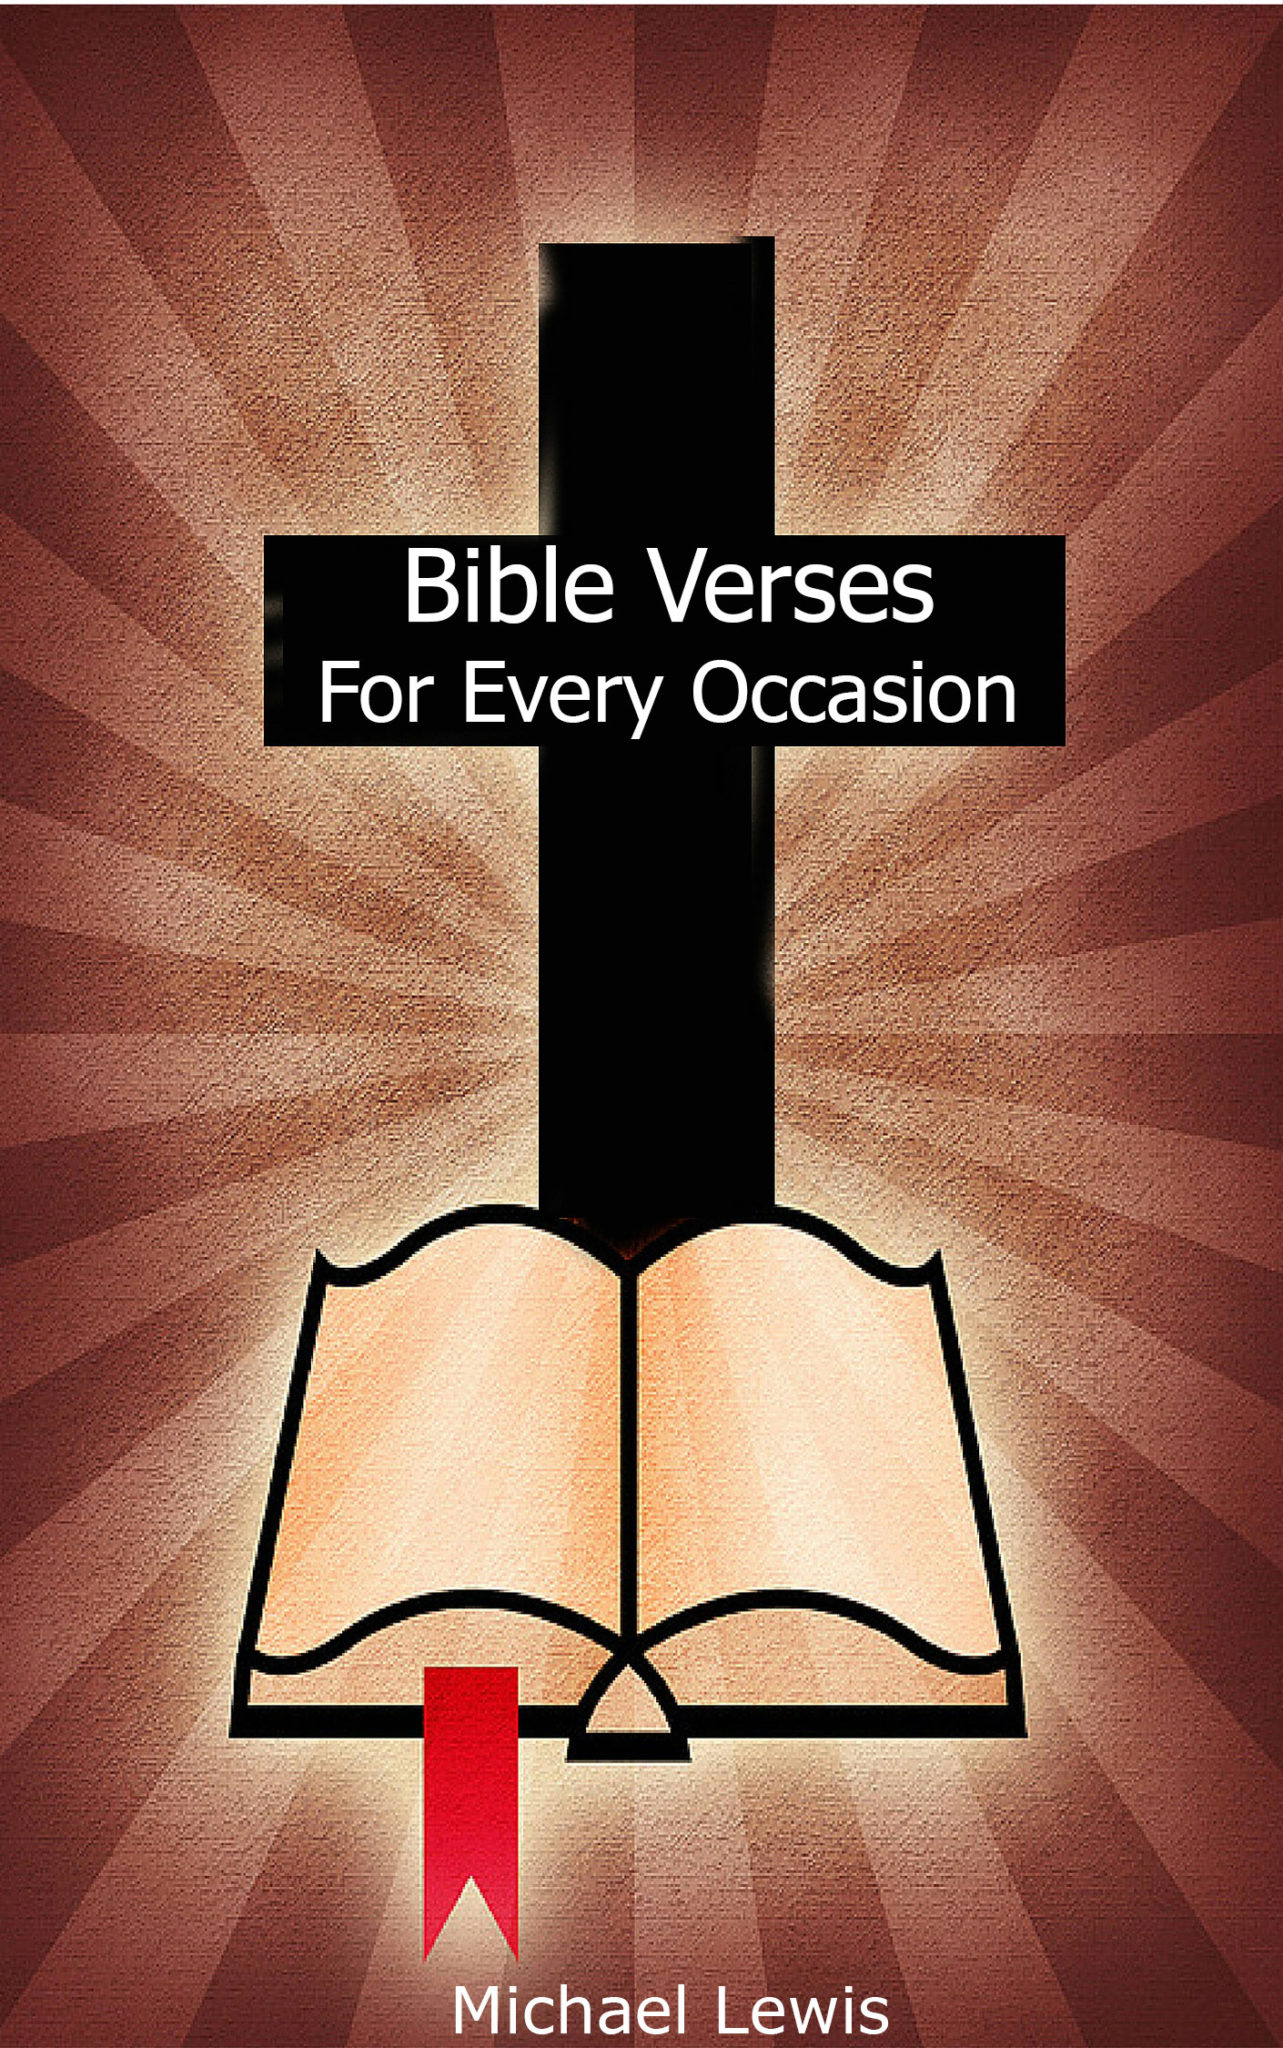 FREE: Bible Verses for Every Occasion by Michael Lewis